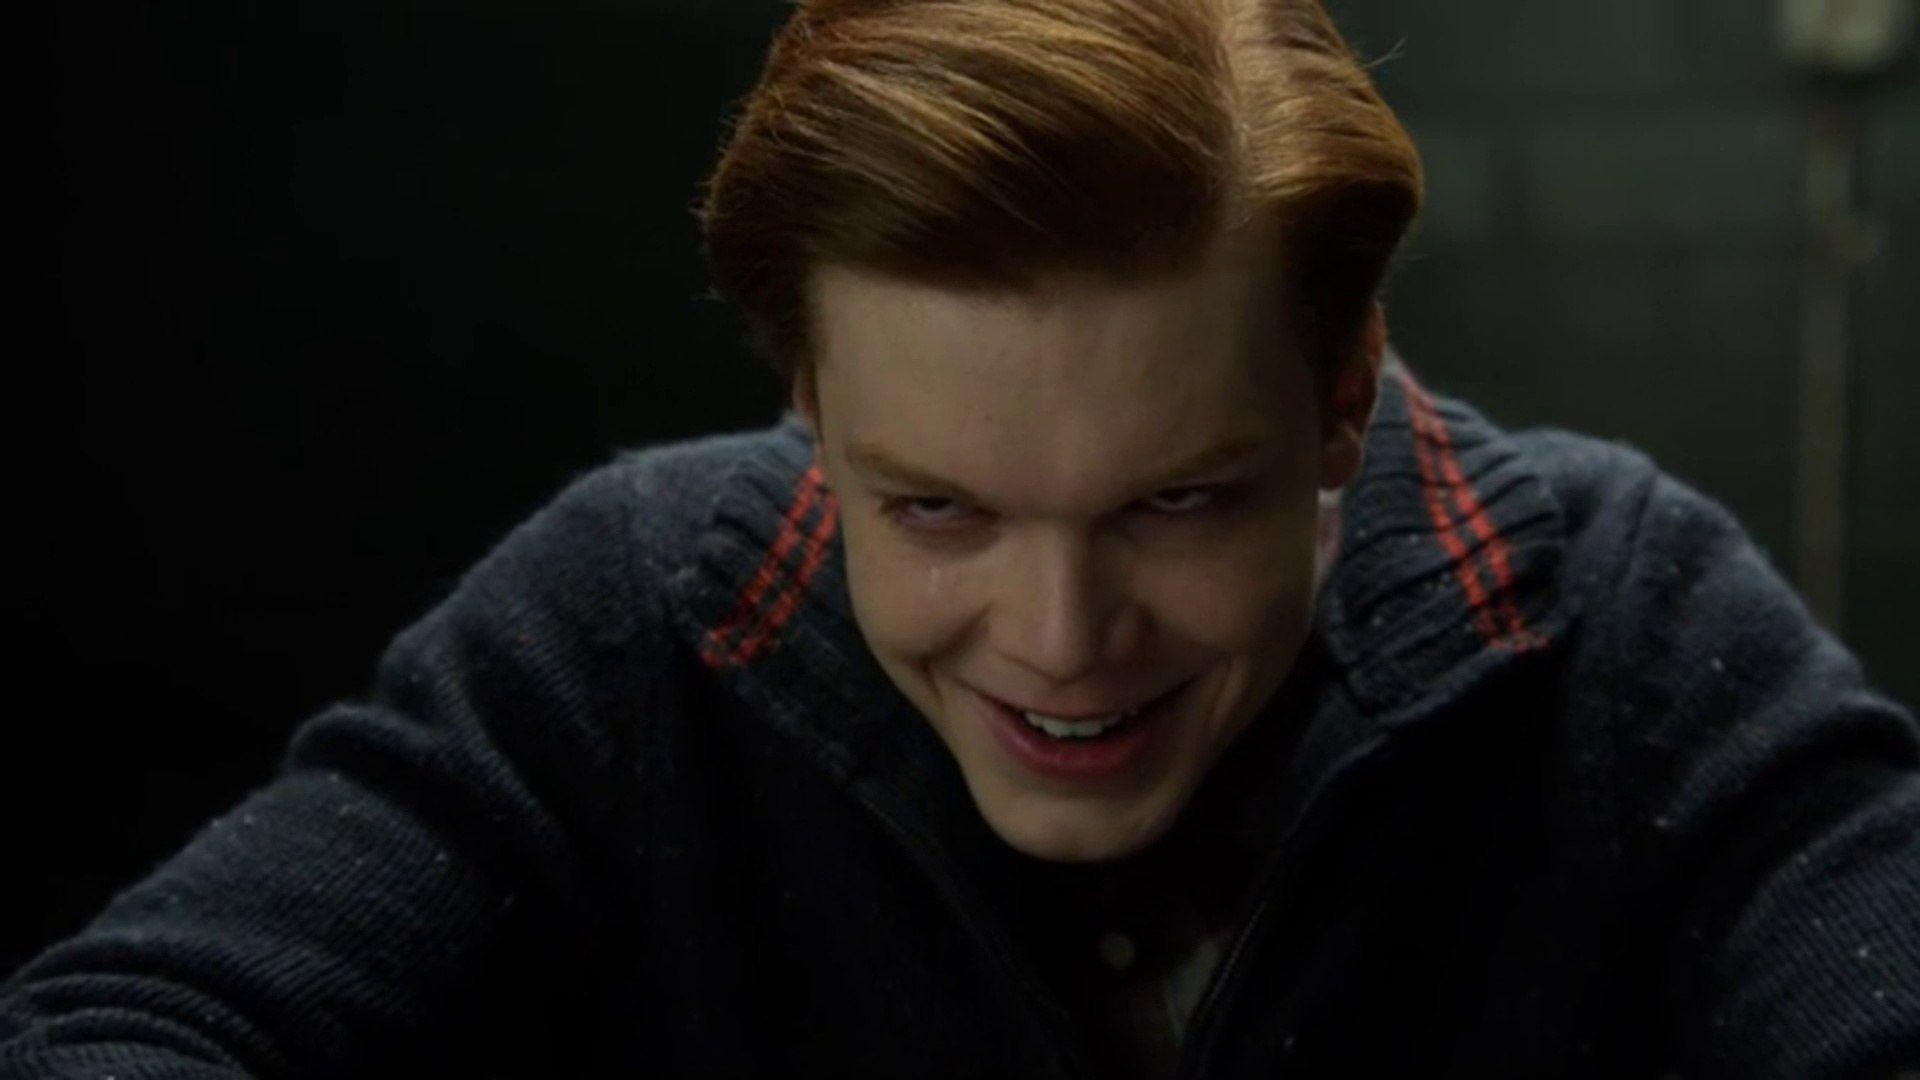 Cameron Monaghan as Jerome a.k.a. THE JOKER in GOTHAM?